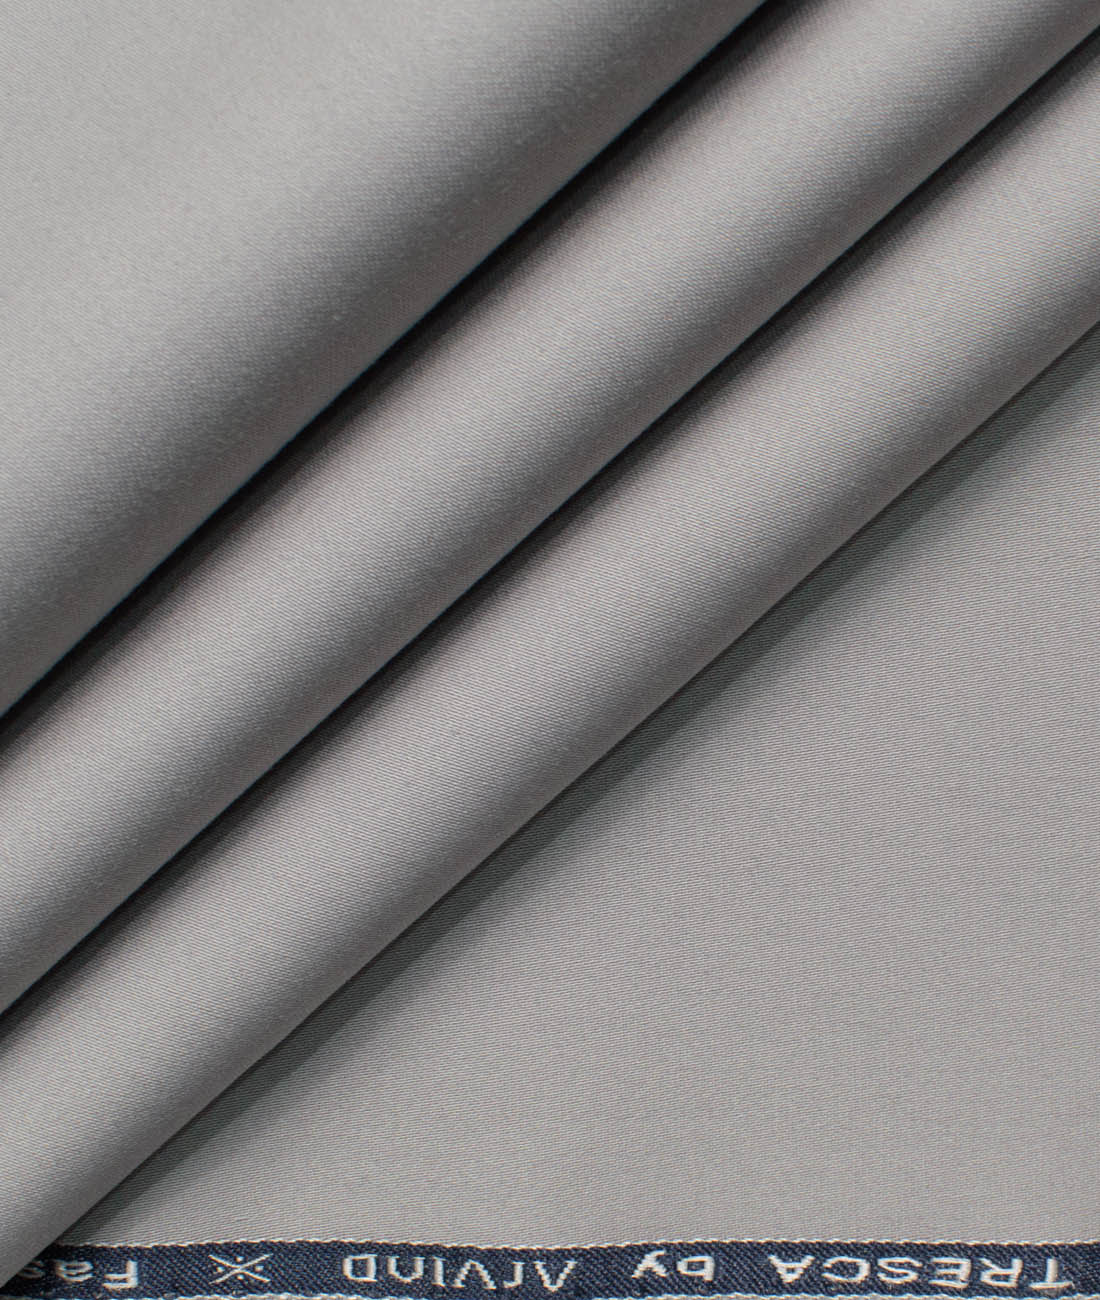 Buy Lycra Fabric Online in India @ Low Prices - SourceItRight